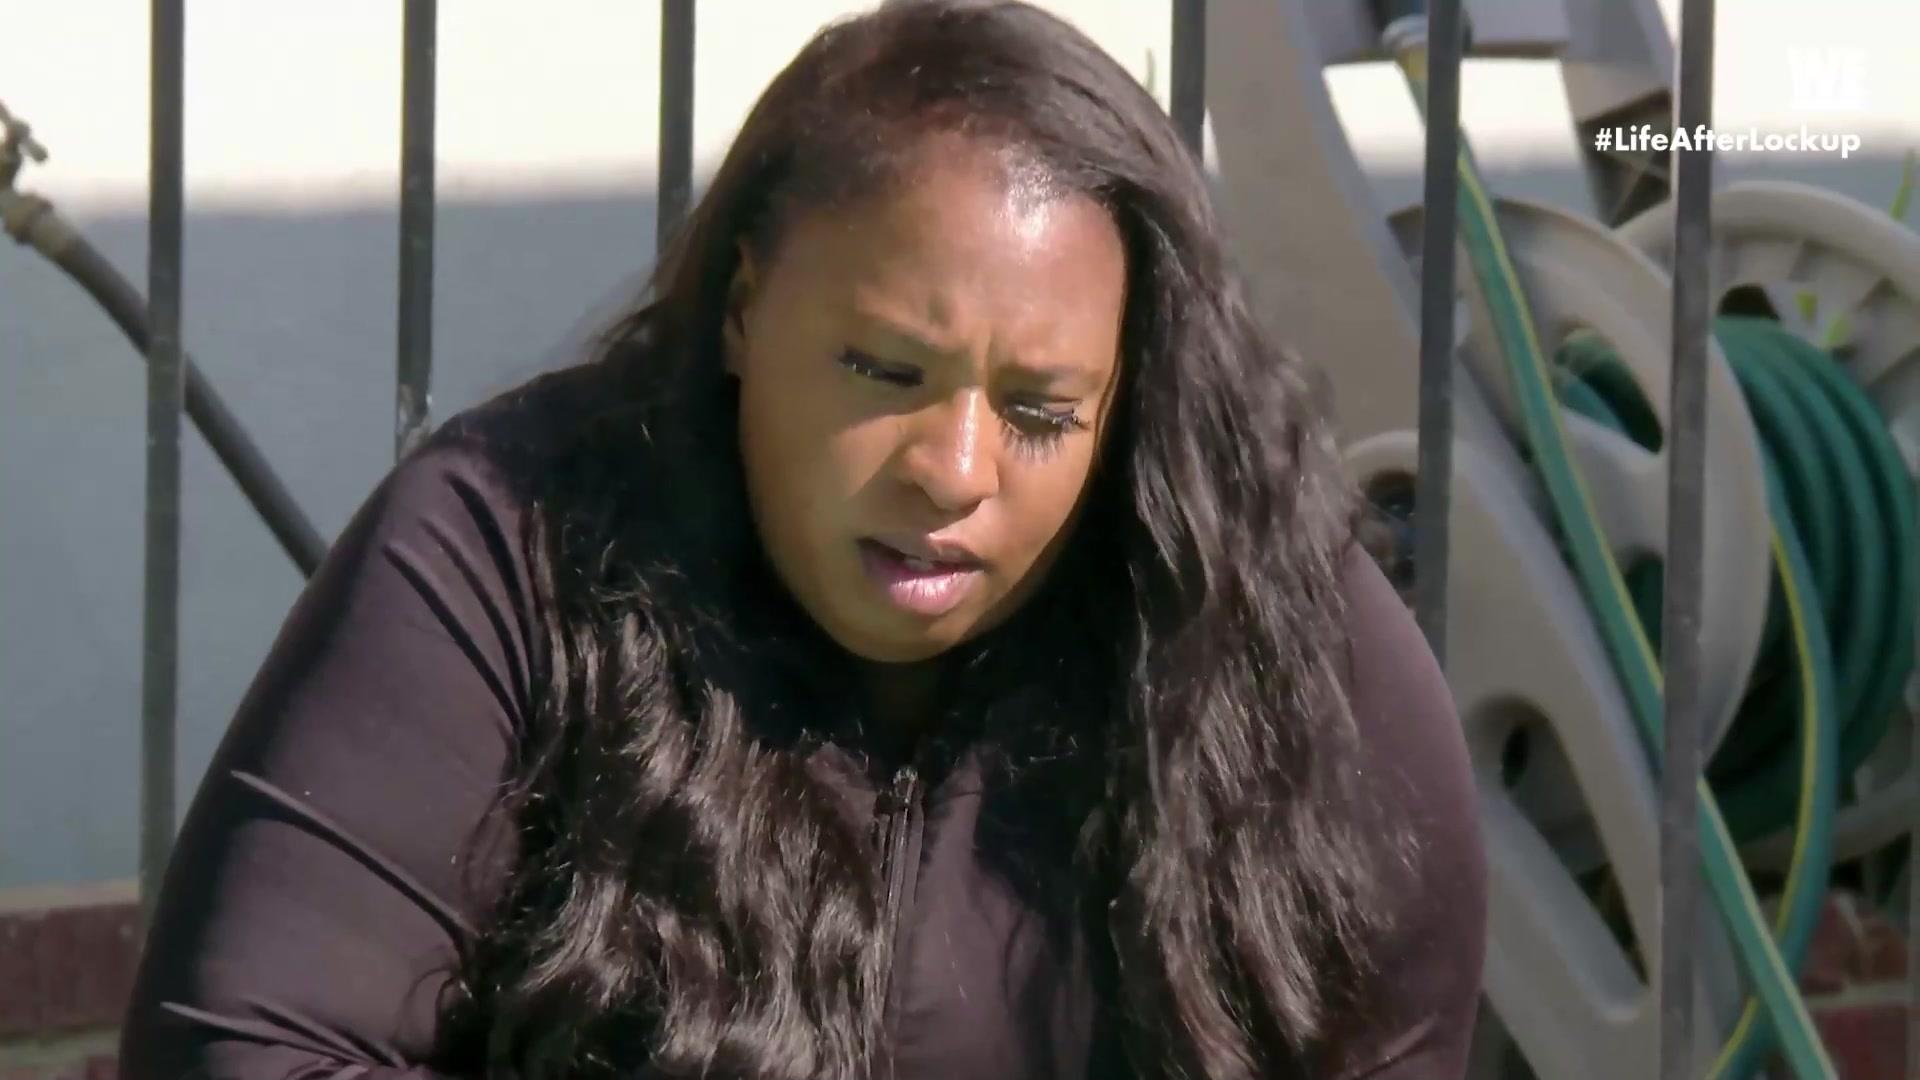 Watch Overheard: 'How Do You Know About Shante?' | Life After Lockup Video Extras